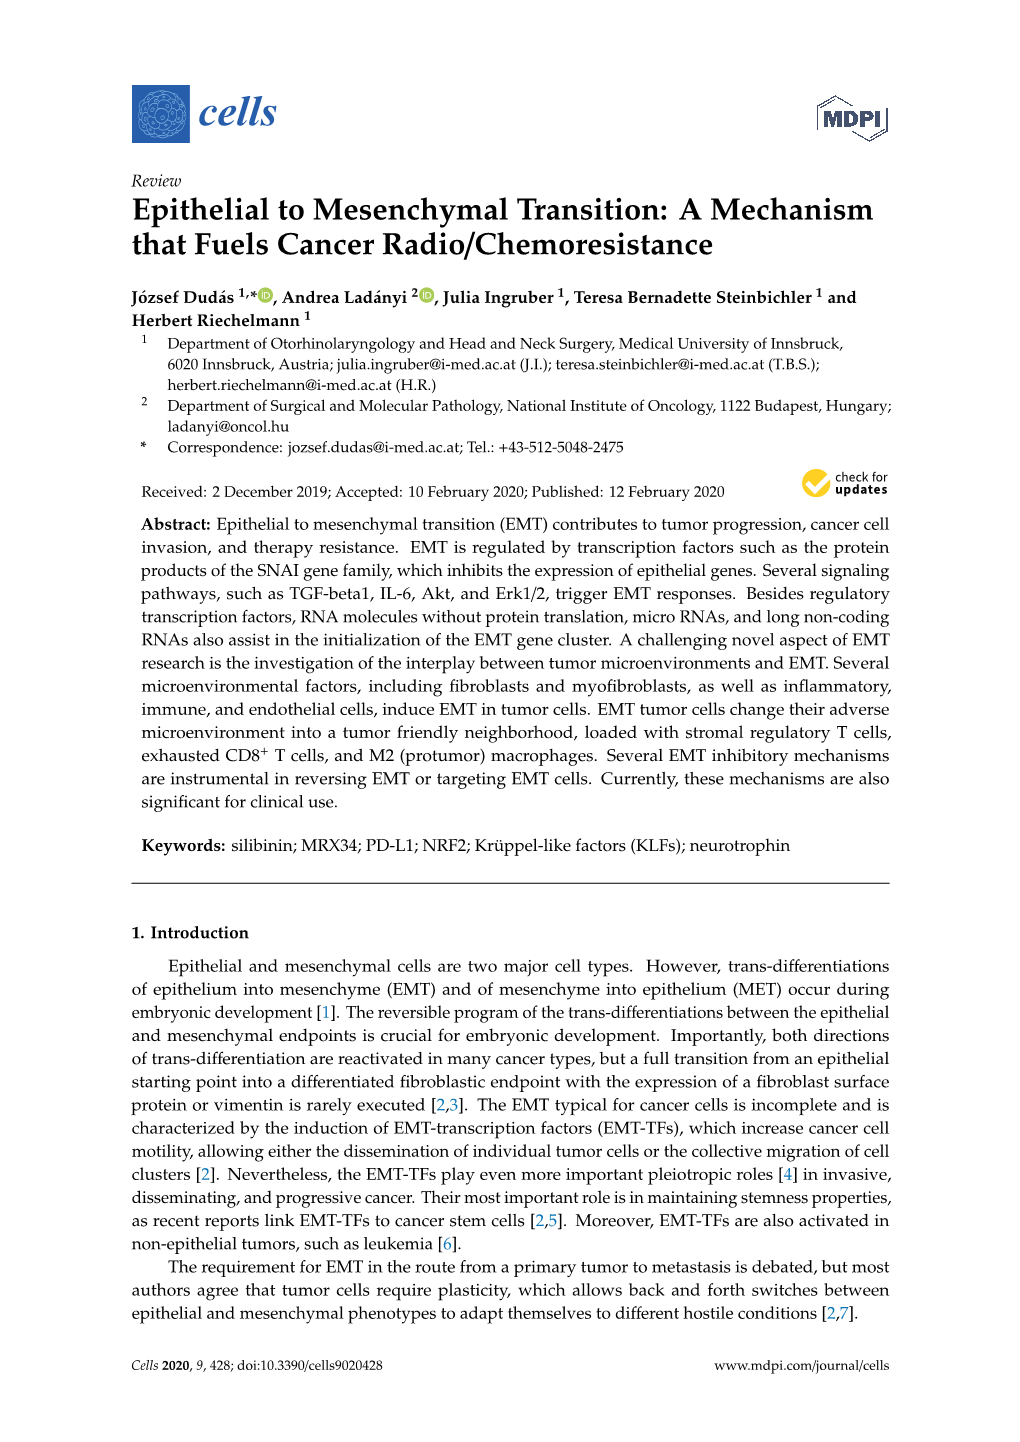 Epithelial to Mesenchymal Transition: a Mechanism That Fuels Cancer Radio/Chemoresistance